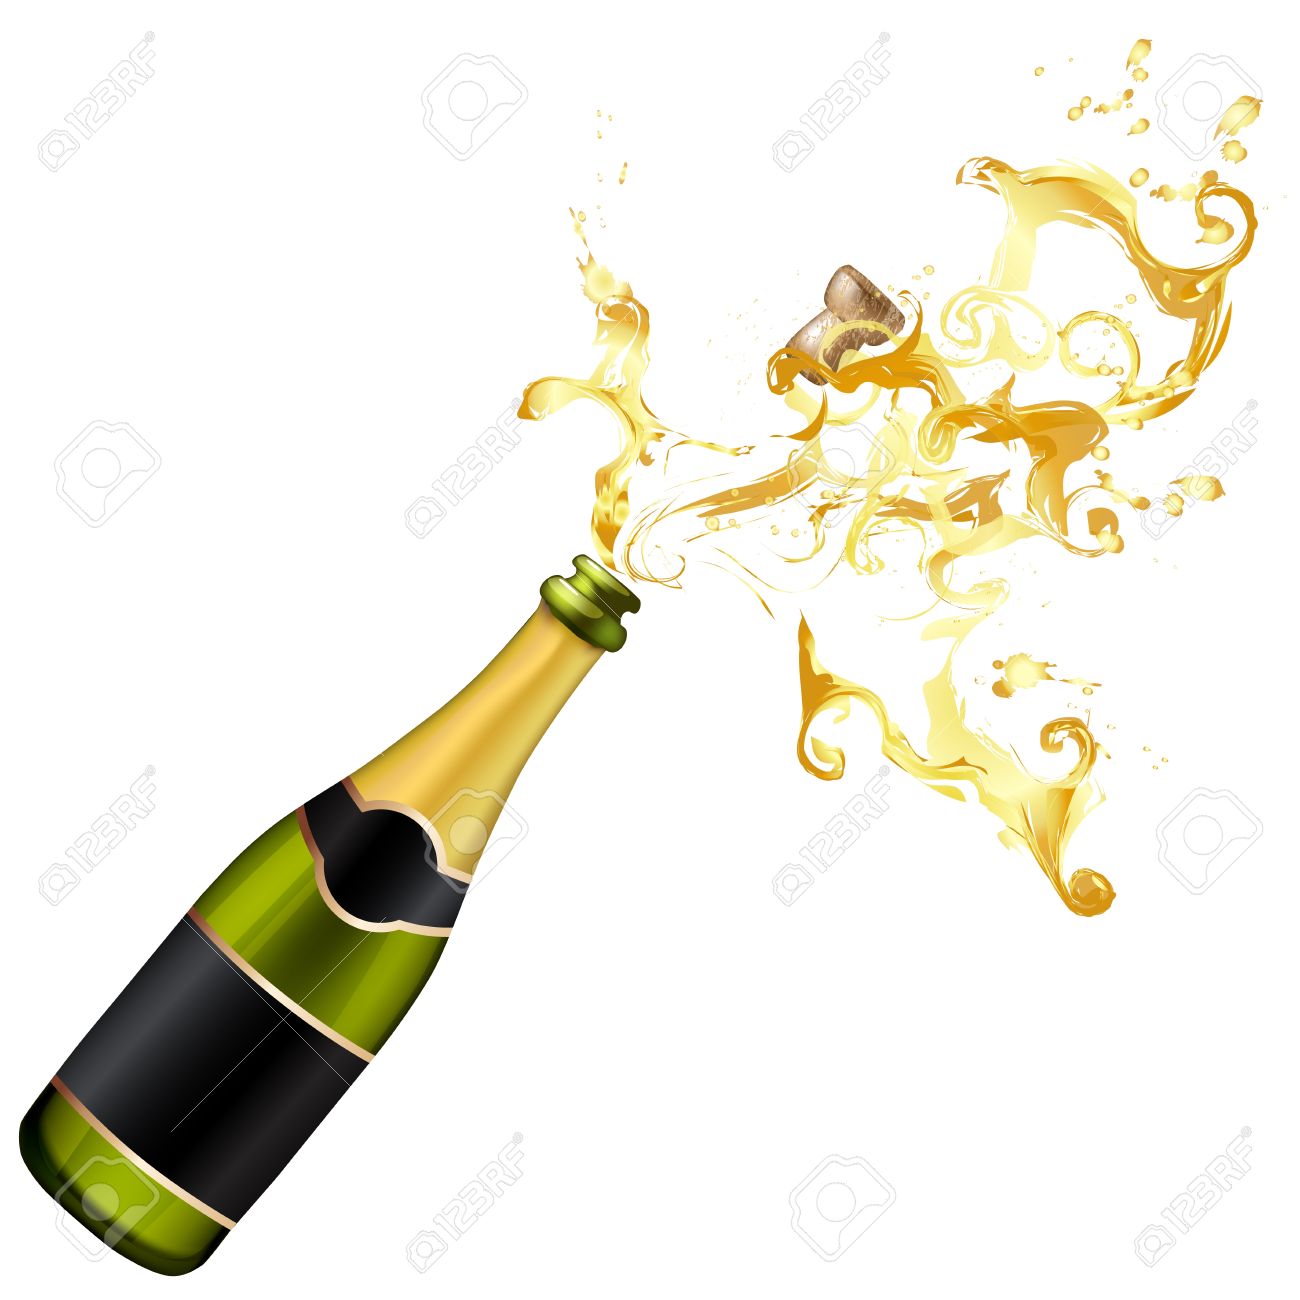 Champagne clipart cork pencil and in color champagne jpg